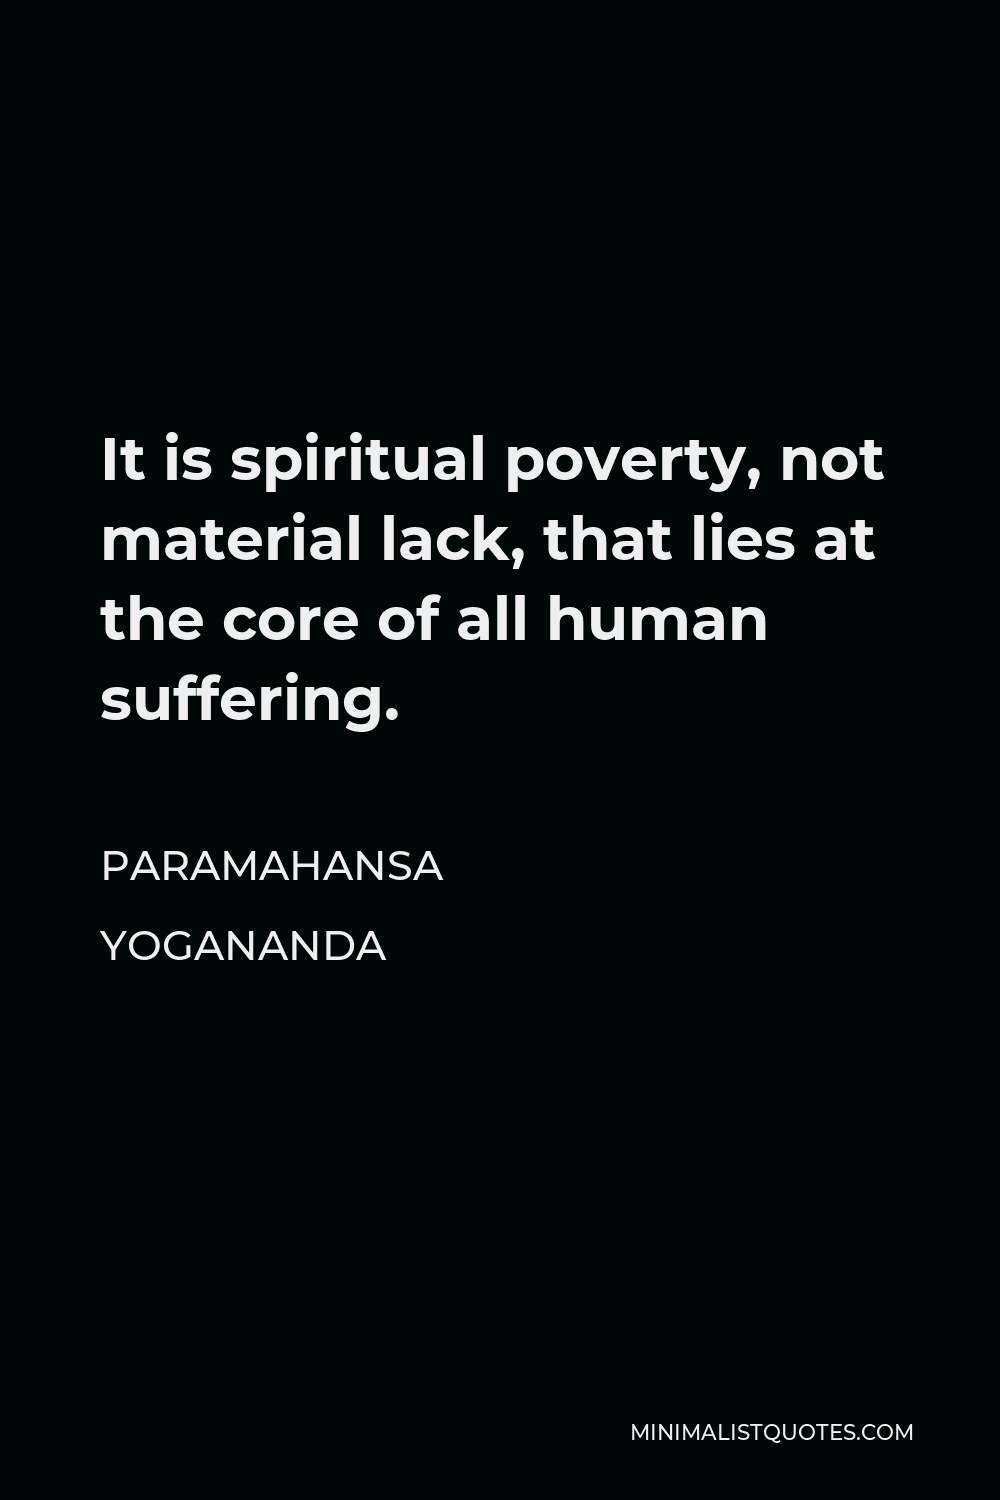 Paramahansa Yogananda Quote - It is spiritual poverty, not material lack, that lies at the core of all human suffering.